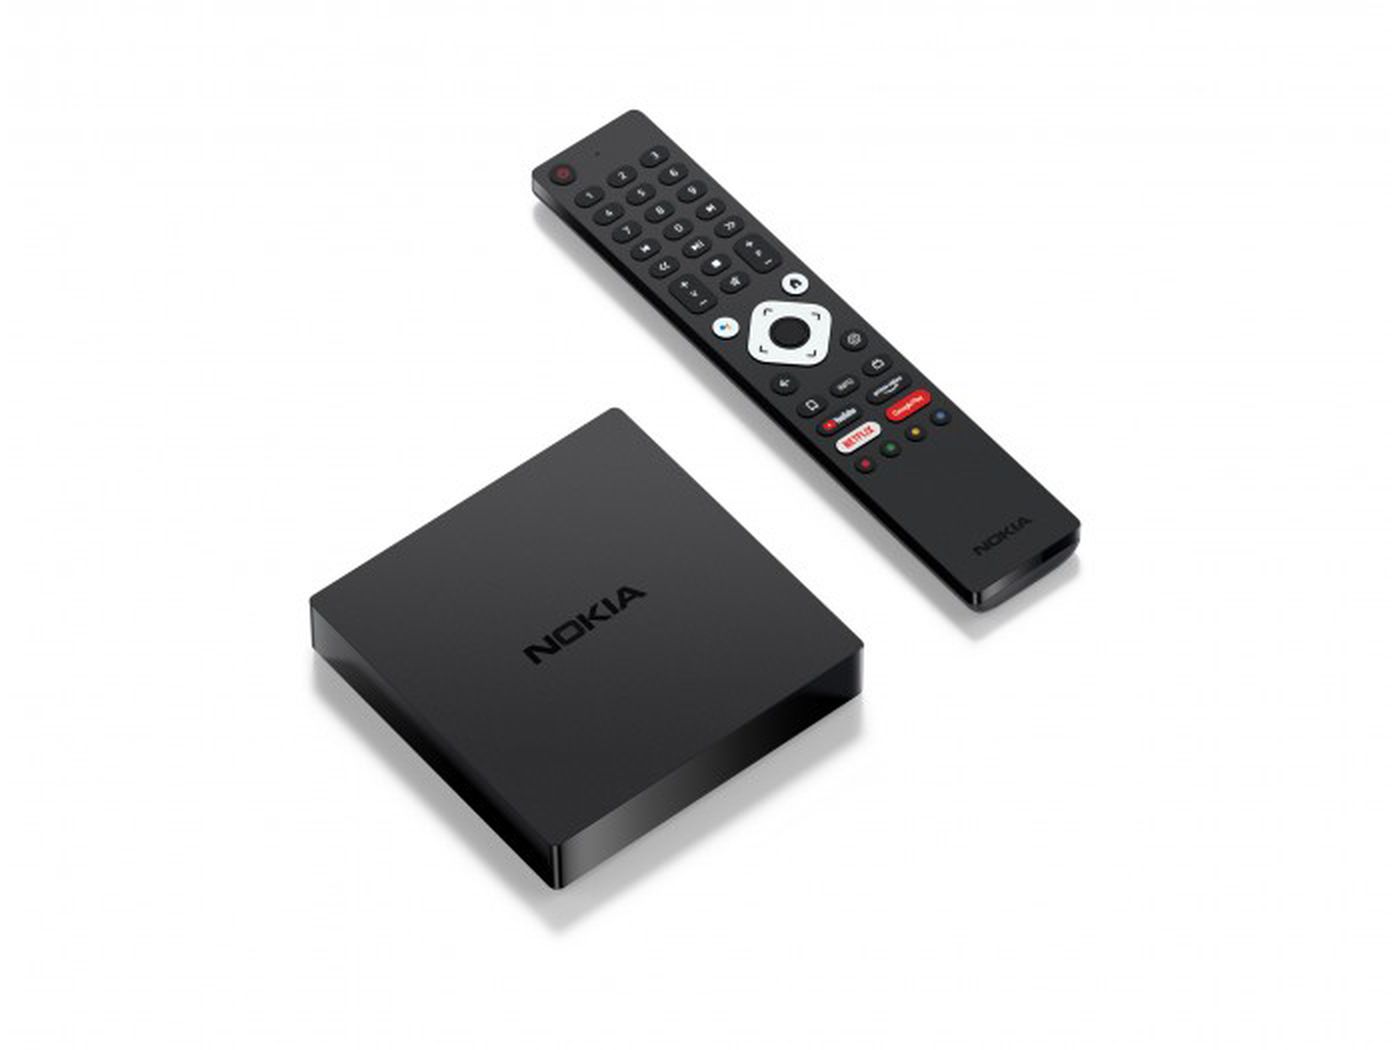 https www theverge com 2020 11 9 21556591 nokia streaming box 8000 android tv streamview price